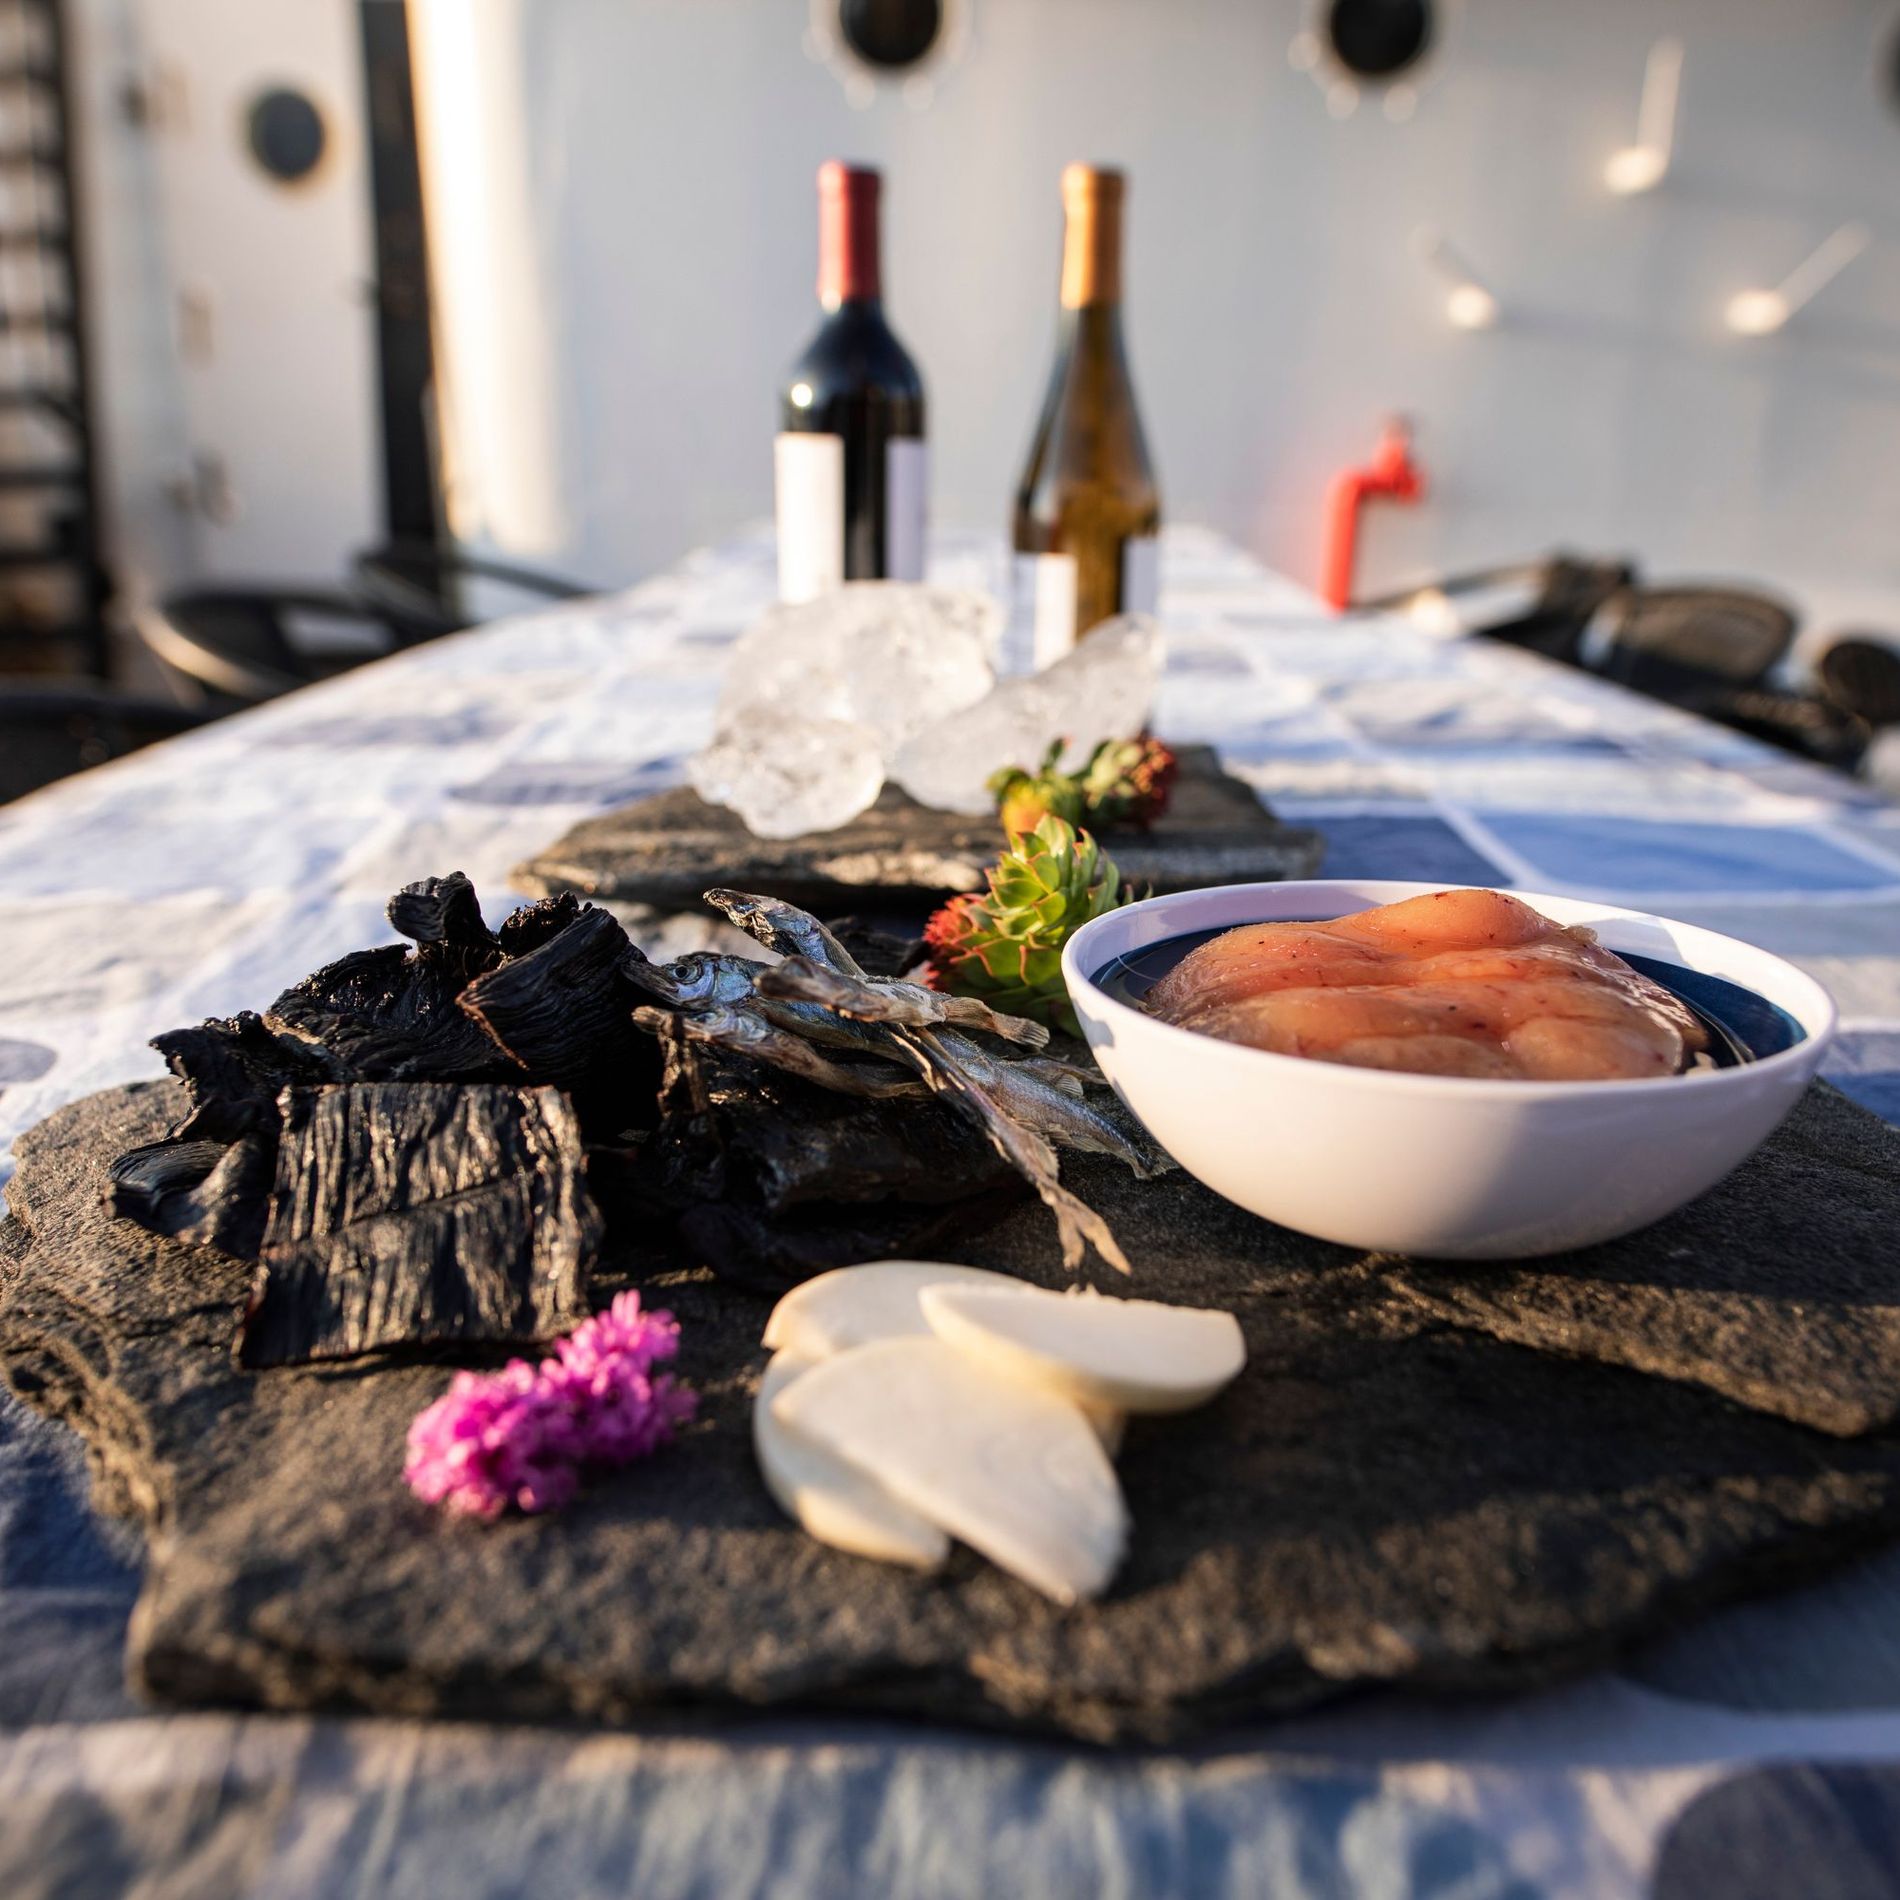 South Greenlandic soul food with fish and wine arranged on a table in the sunshine